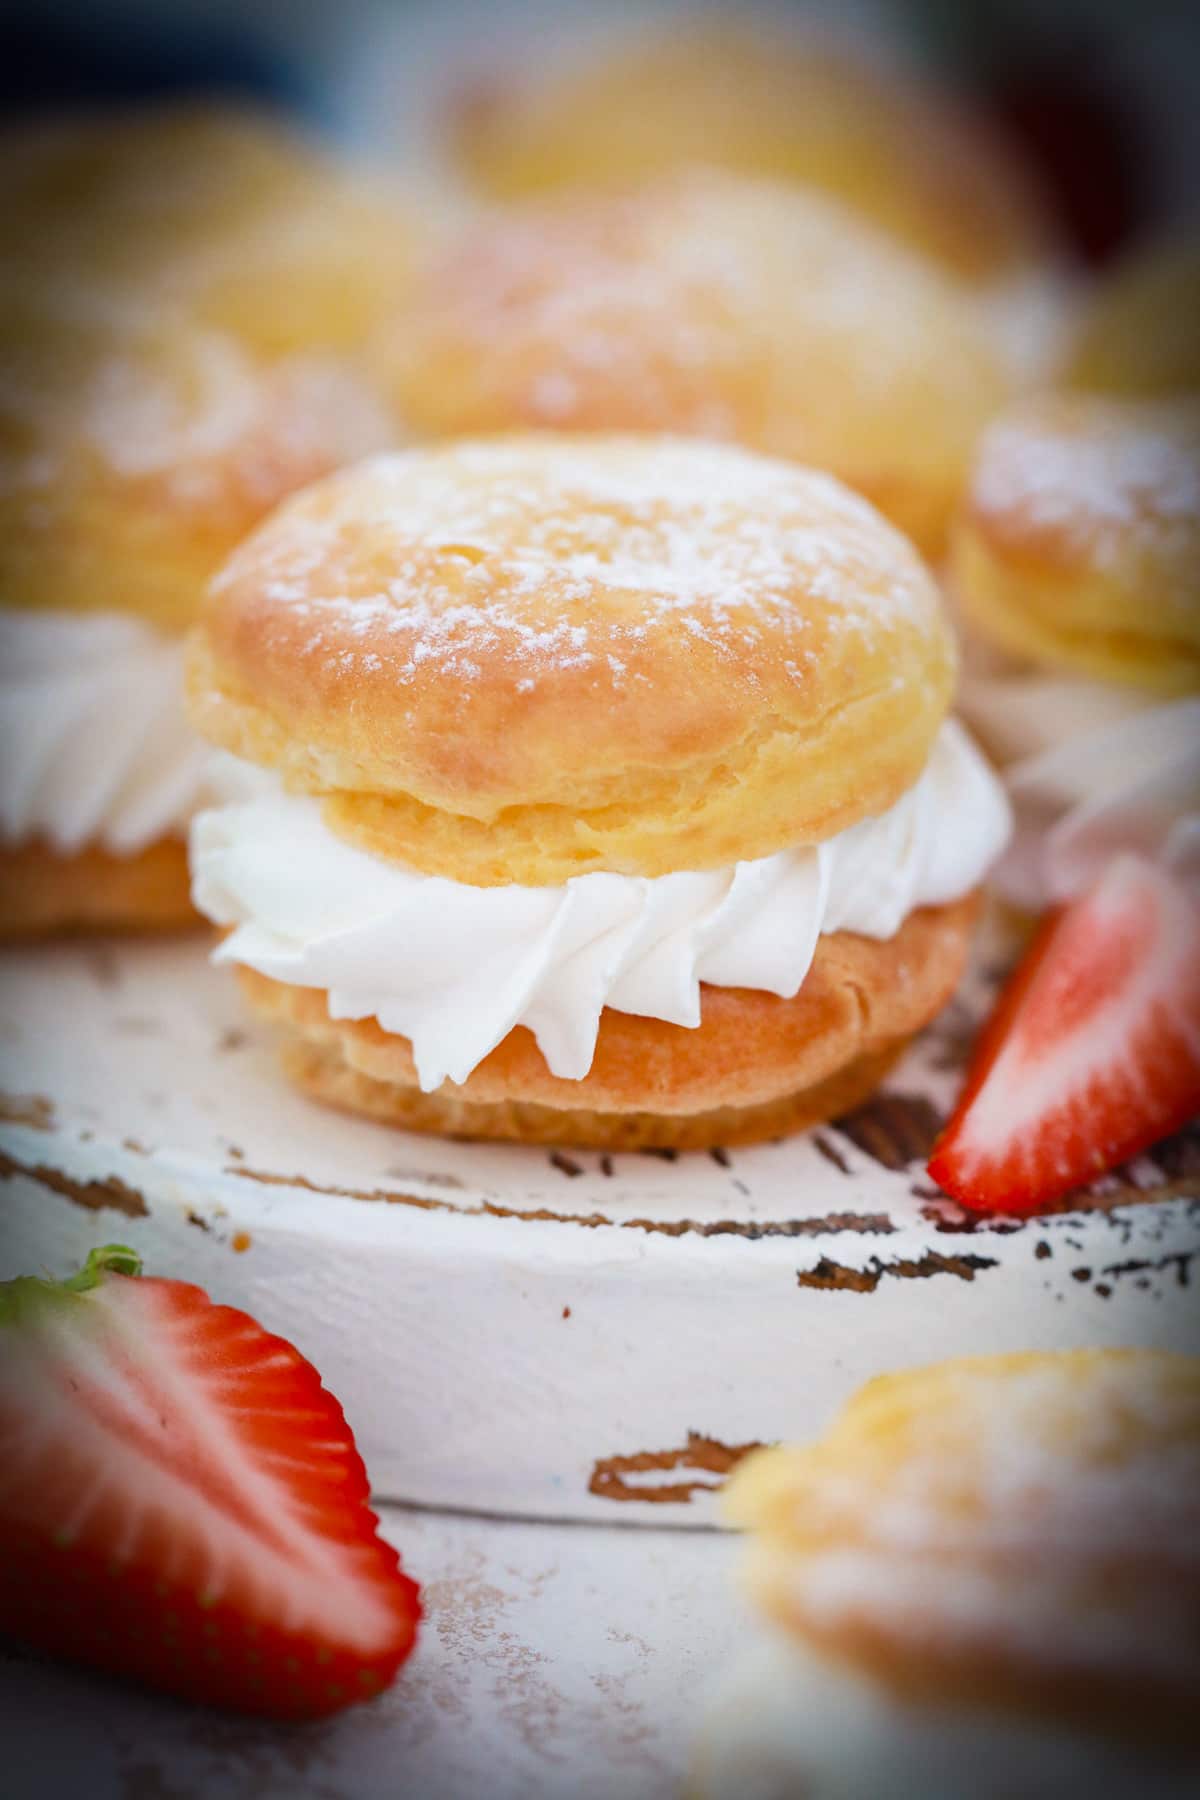 A close up photo of a whipped cream filled cream puff on a white tray.